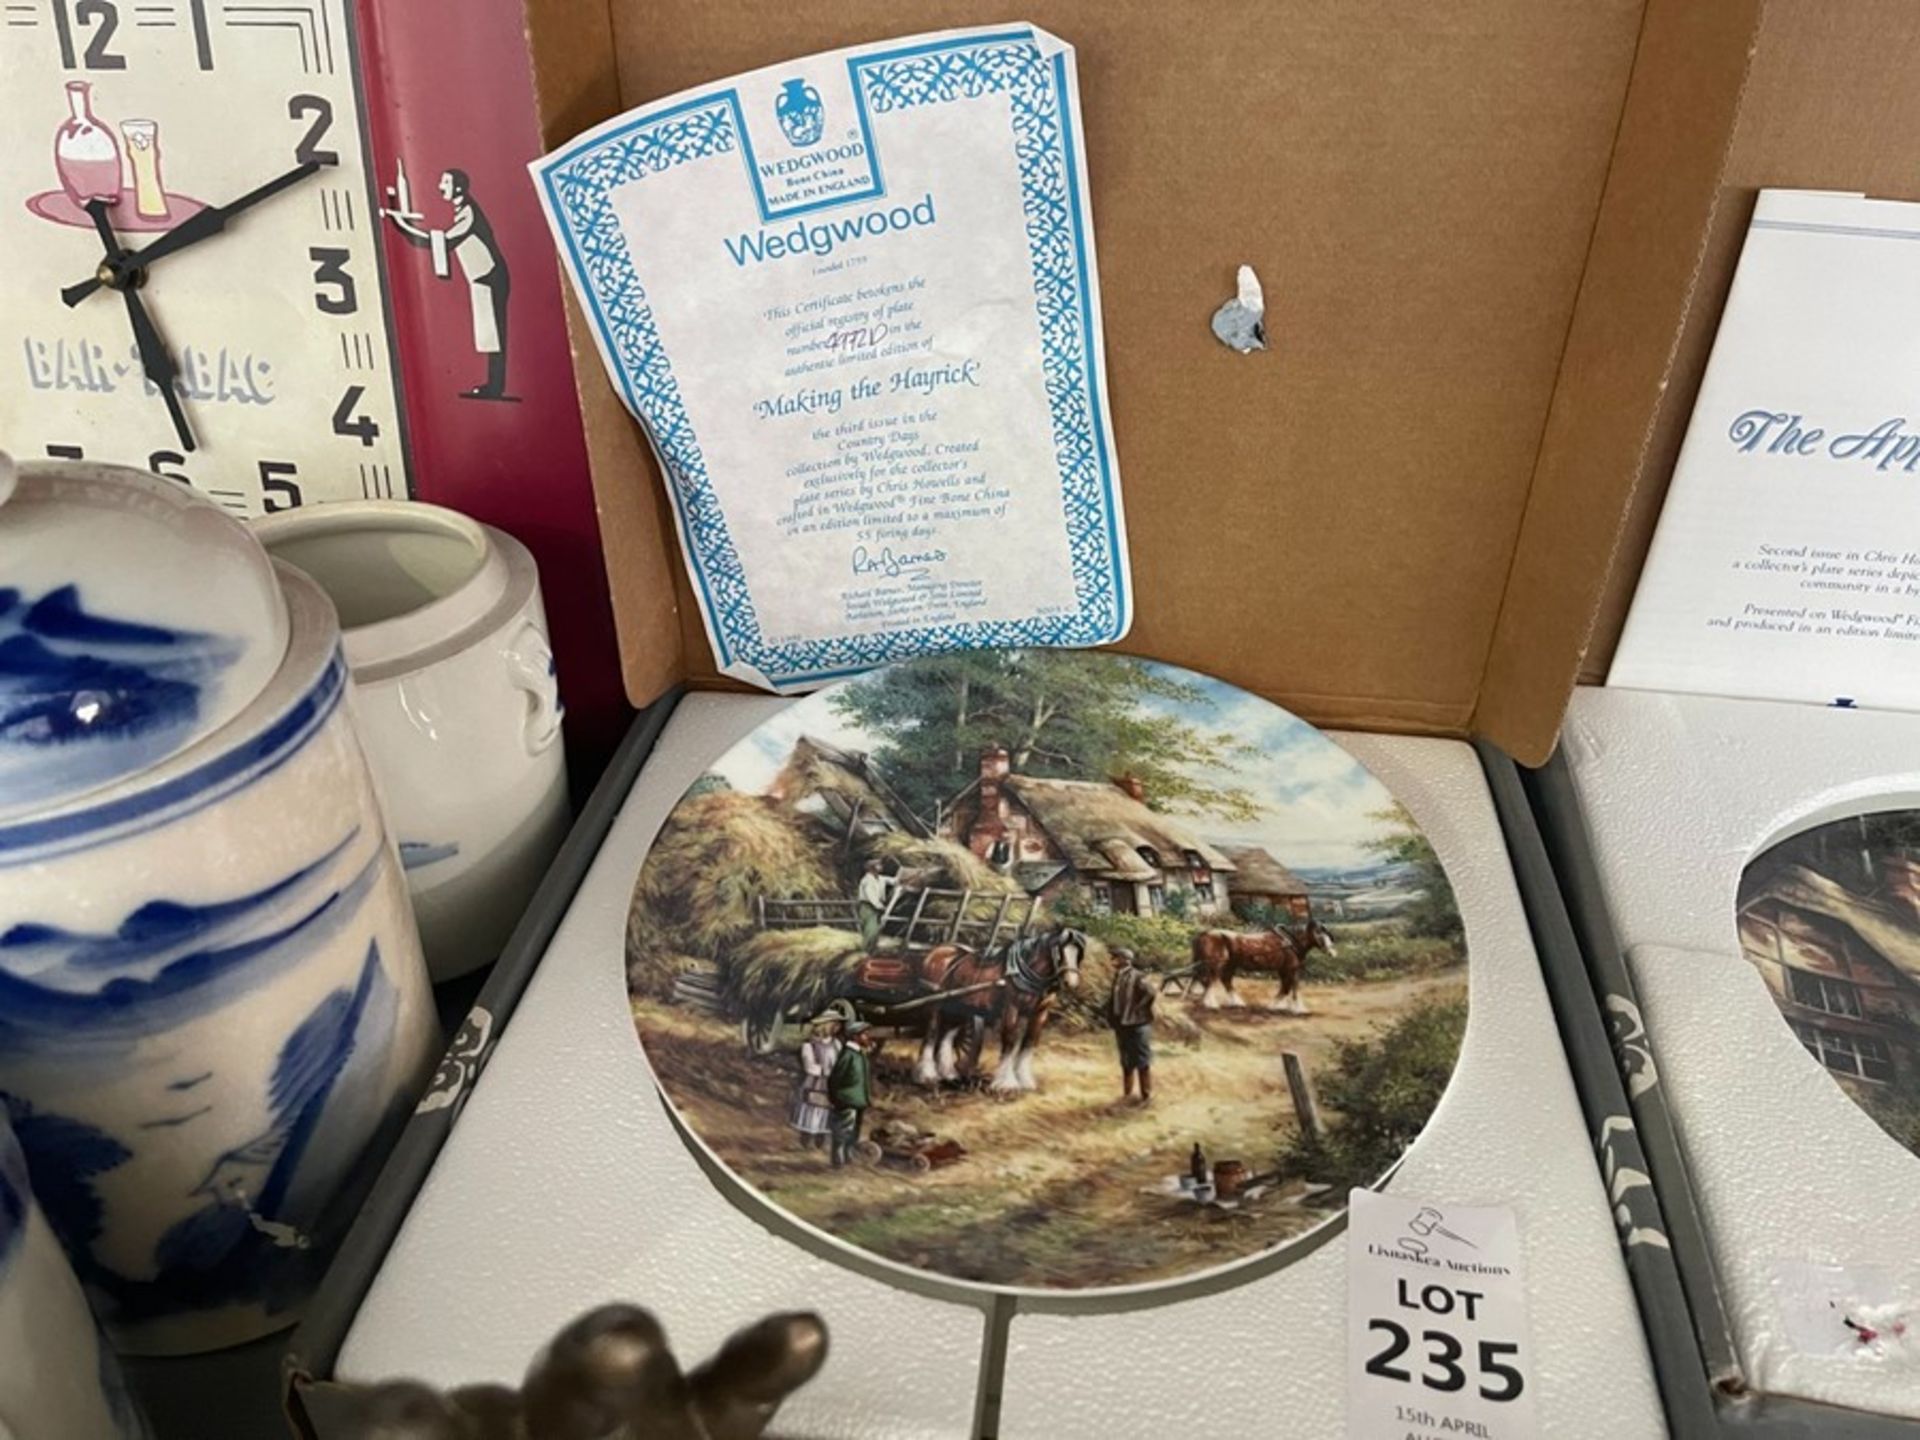 WEDGWOOD MAKING THE HAYRICK COLLECTABLE PLATE